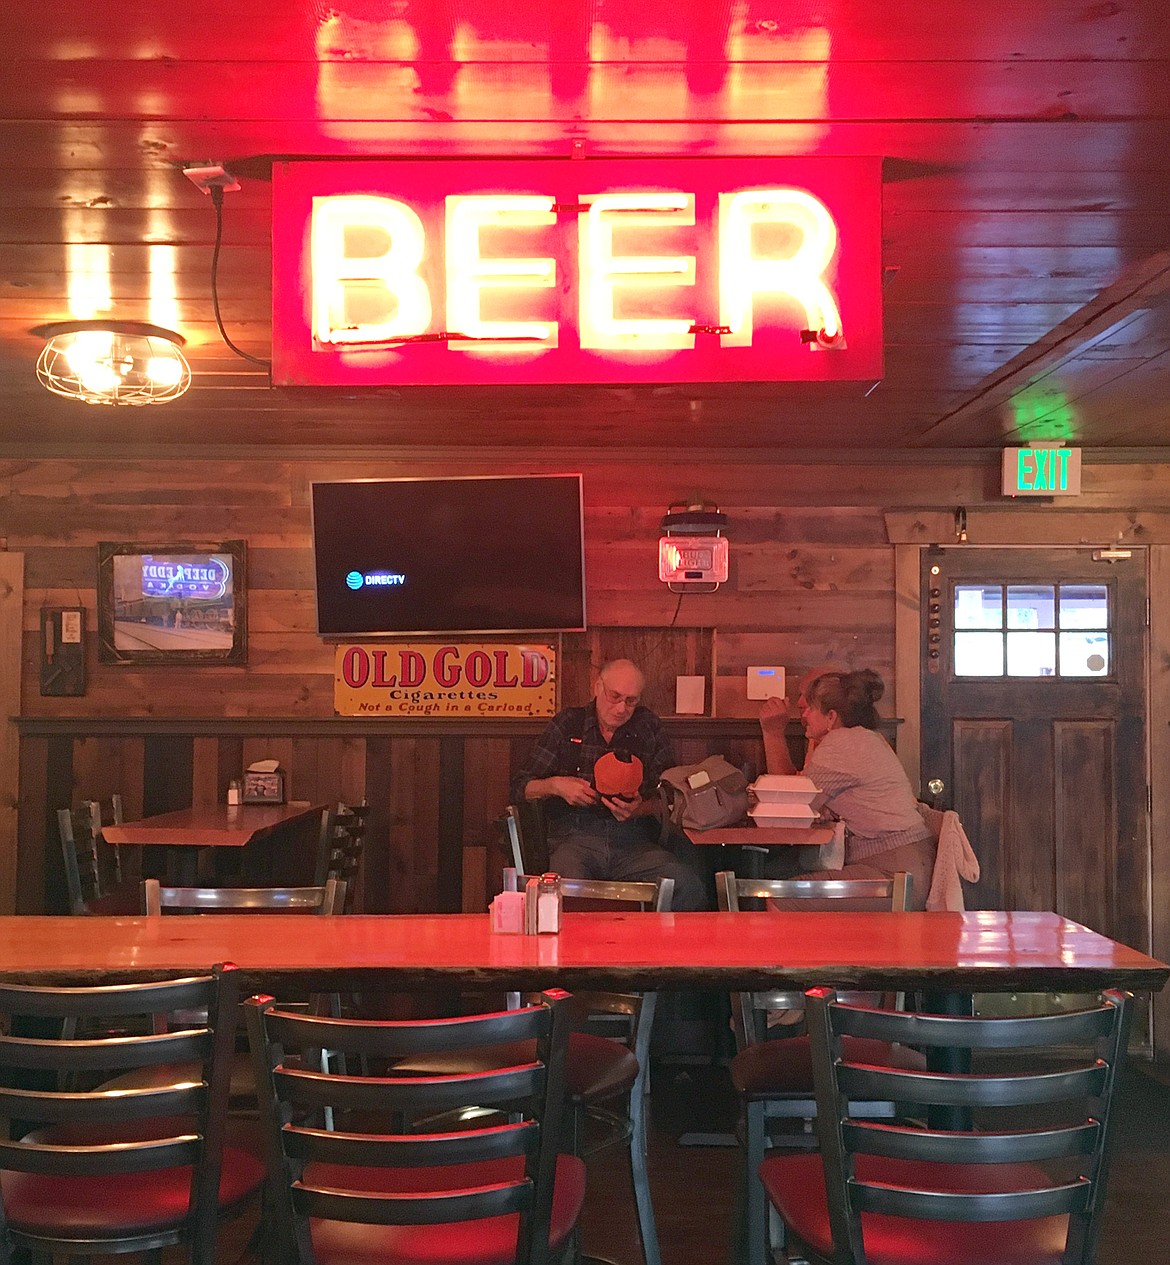 A beer sign sits high above customers at the Hilltop.